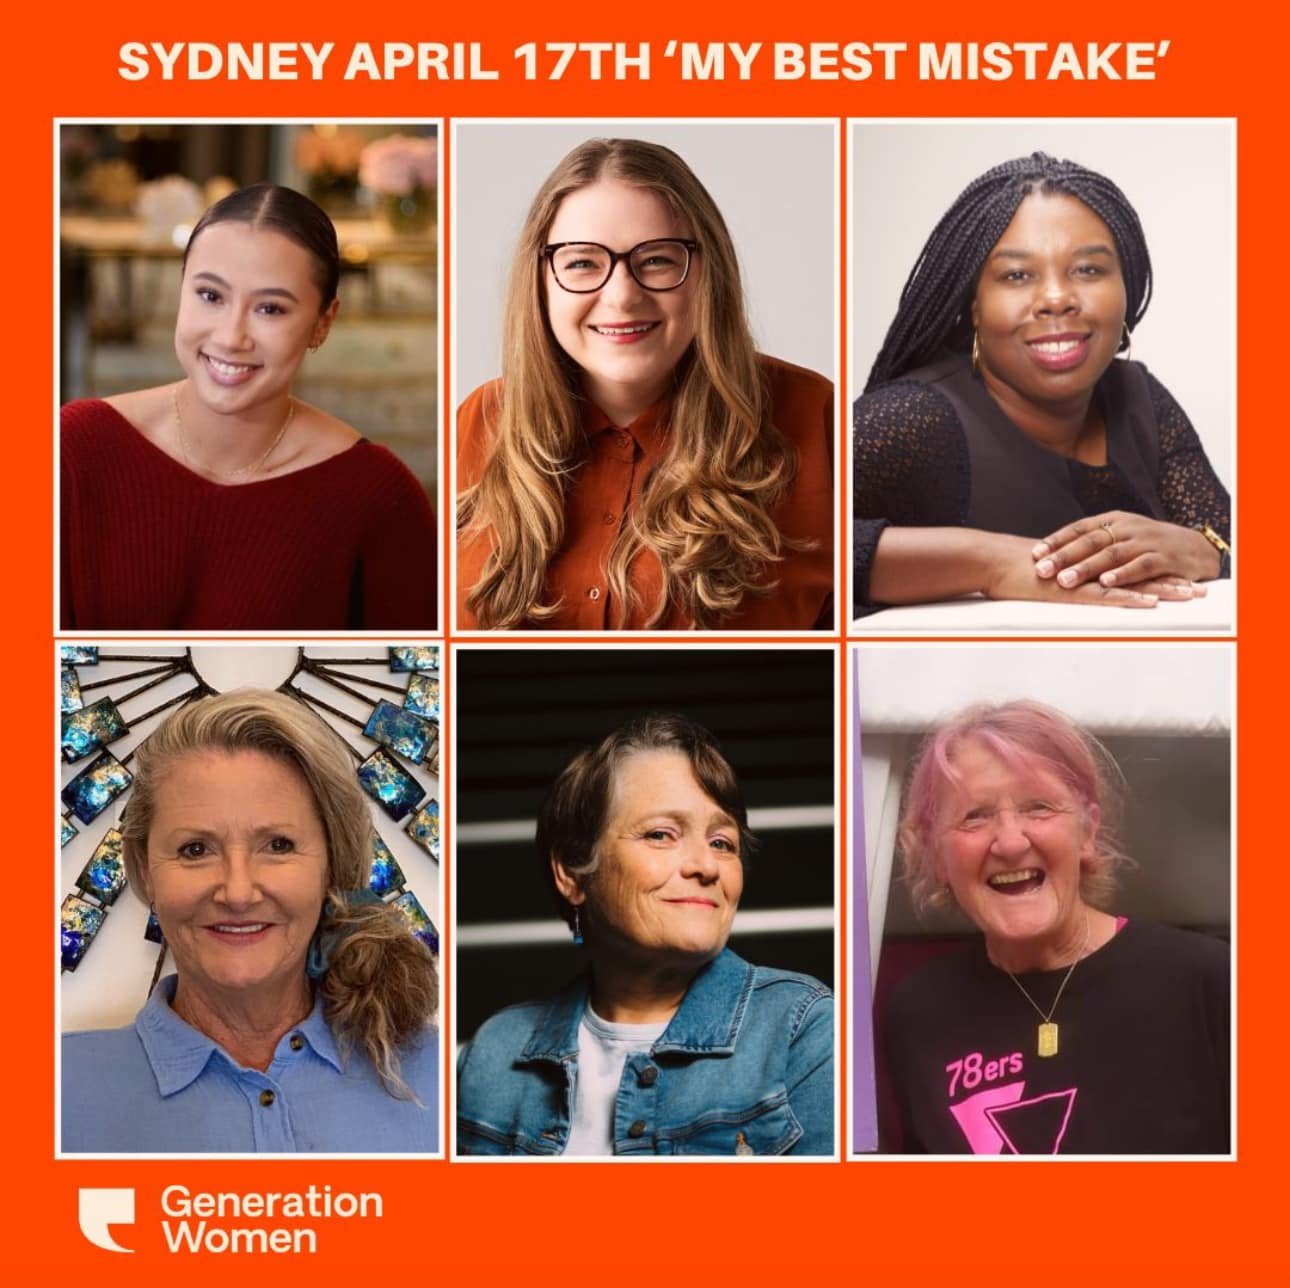 🌟 Exciting Event Alert! 🌟 Join us on April 17th at The Beresford, Surry Hills for an unforgettable evening with incredible storytellers from diverse backgrounds and experiences.

🎤 Meet our lineup for the night:

🌟 Team20s: Maddie King - A 23-yea